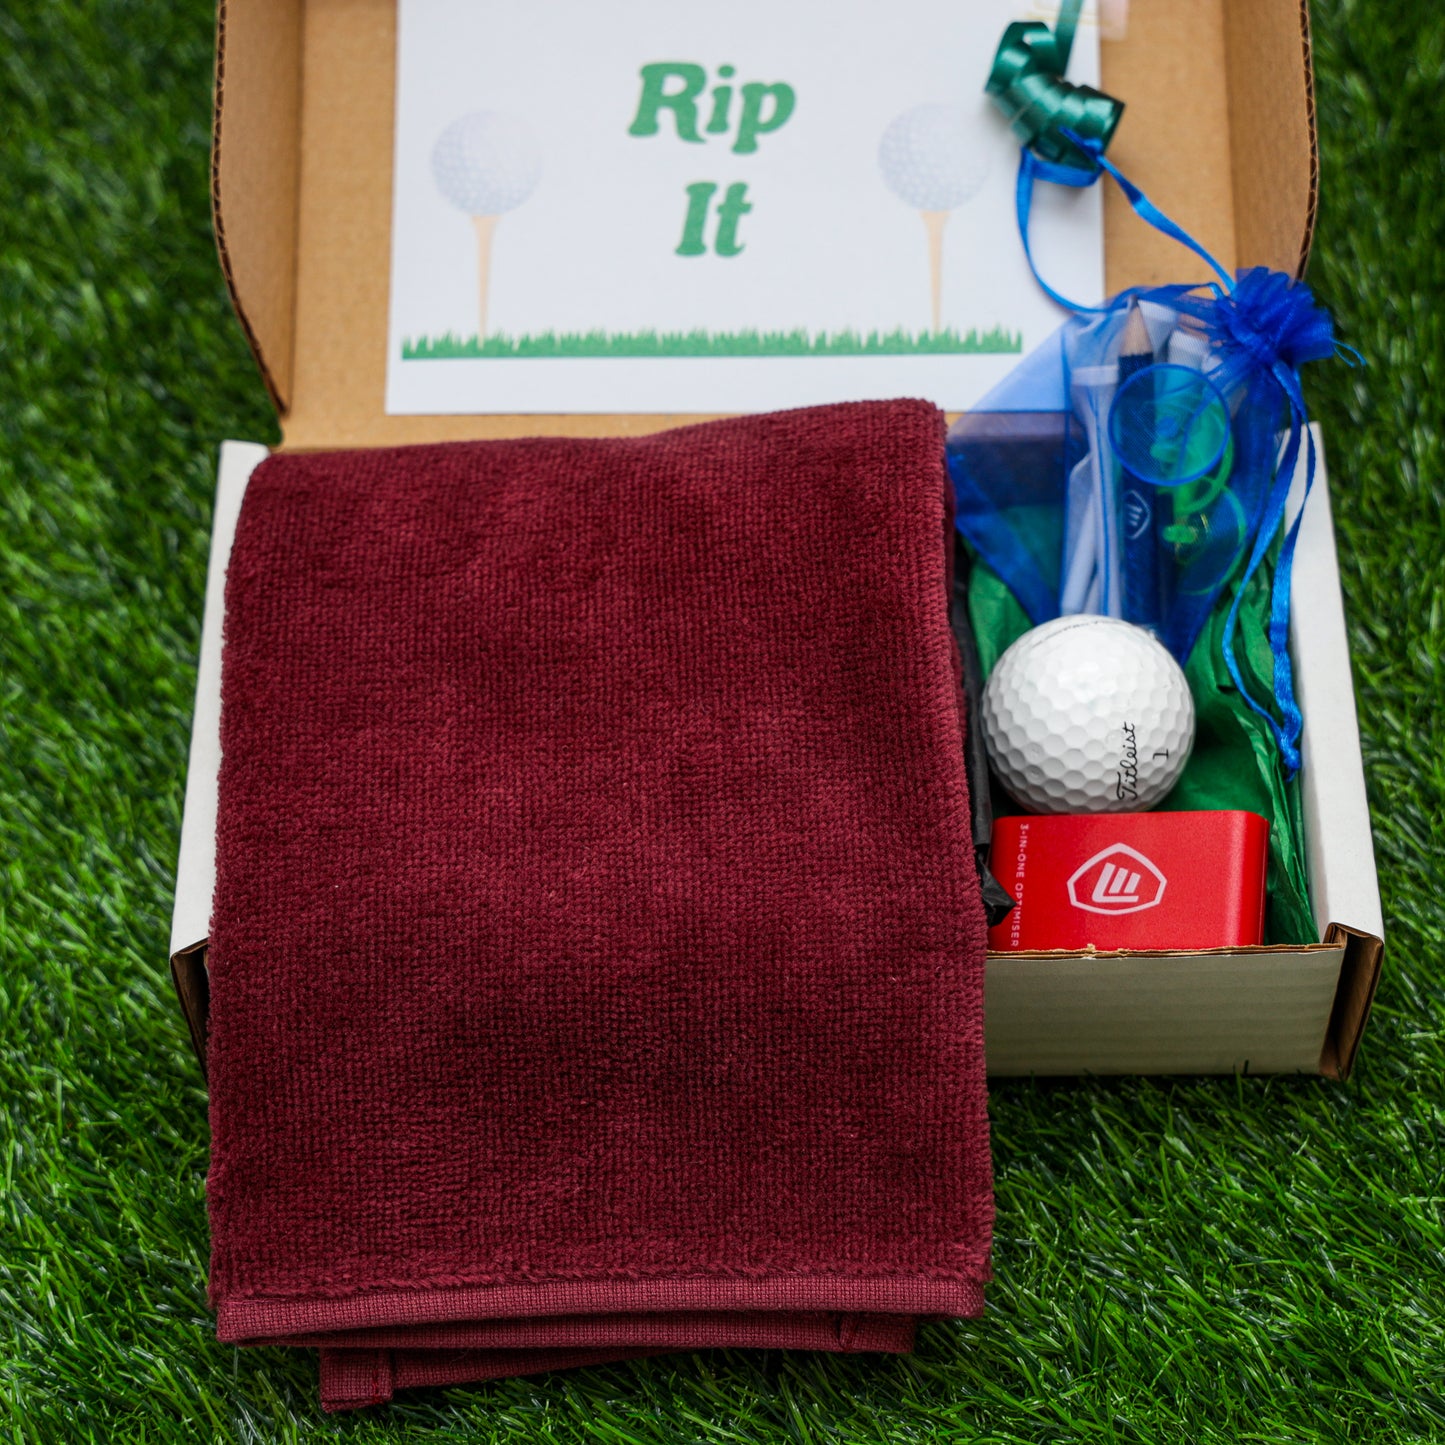 Personalised Tri Fold Golf Towel with Name Golfing Gift Box  - Always Looking Good - Wine Towel  